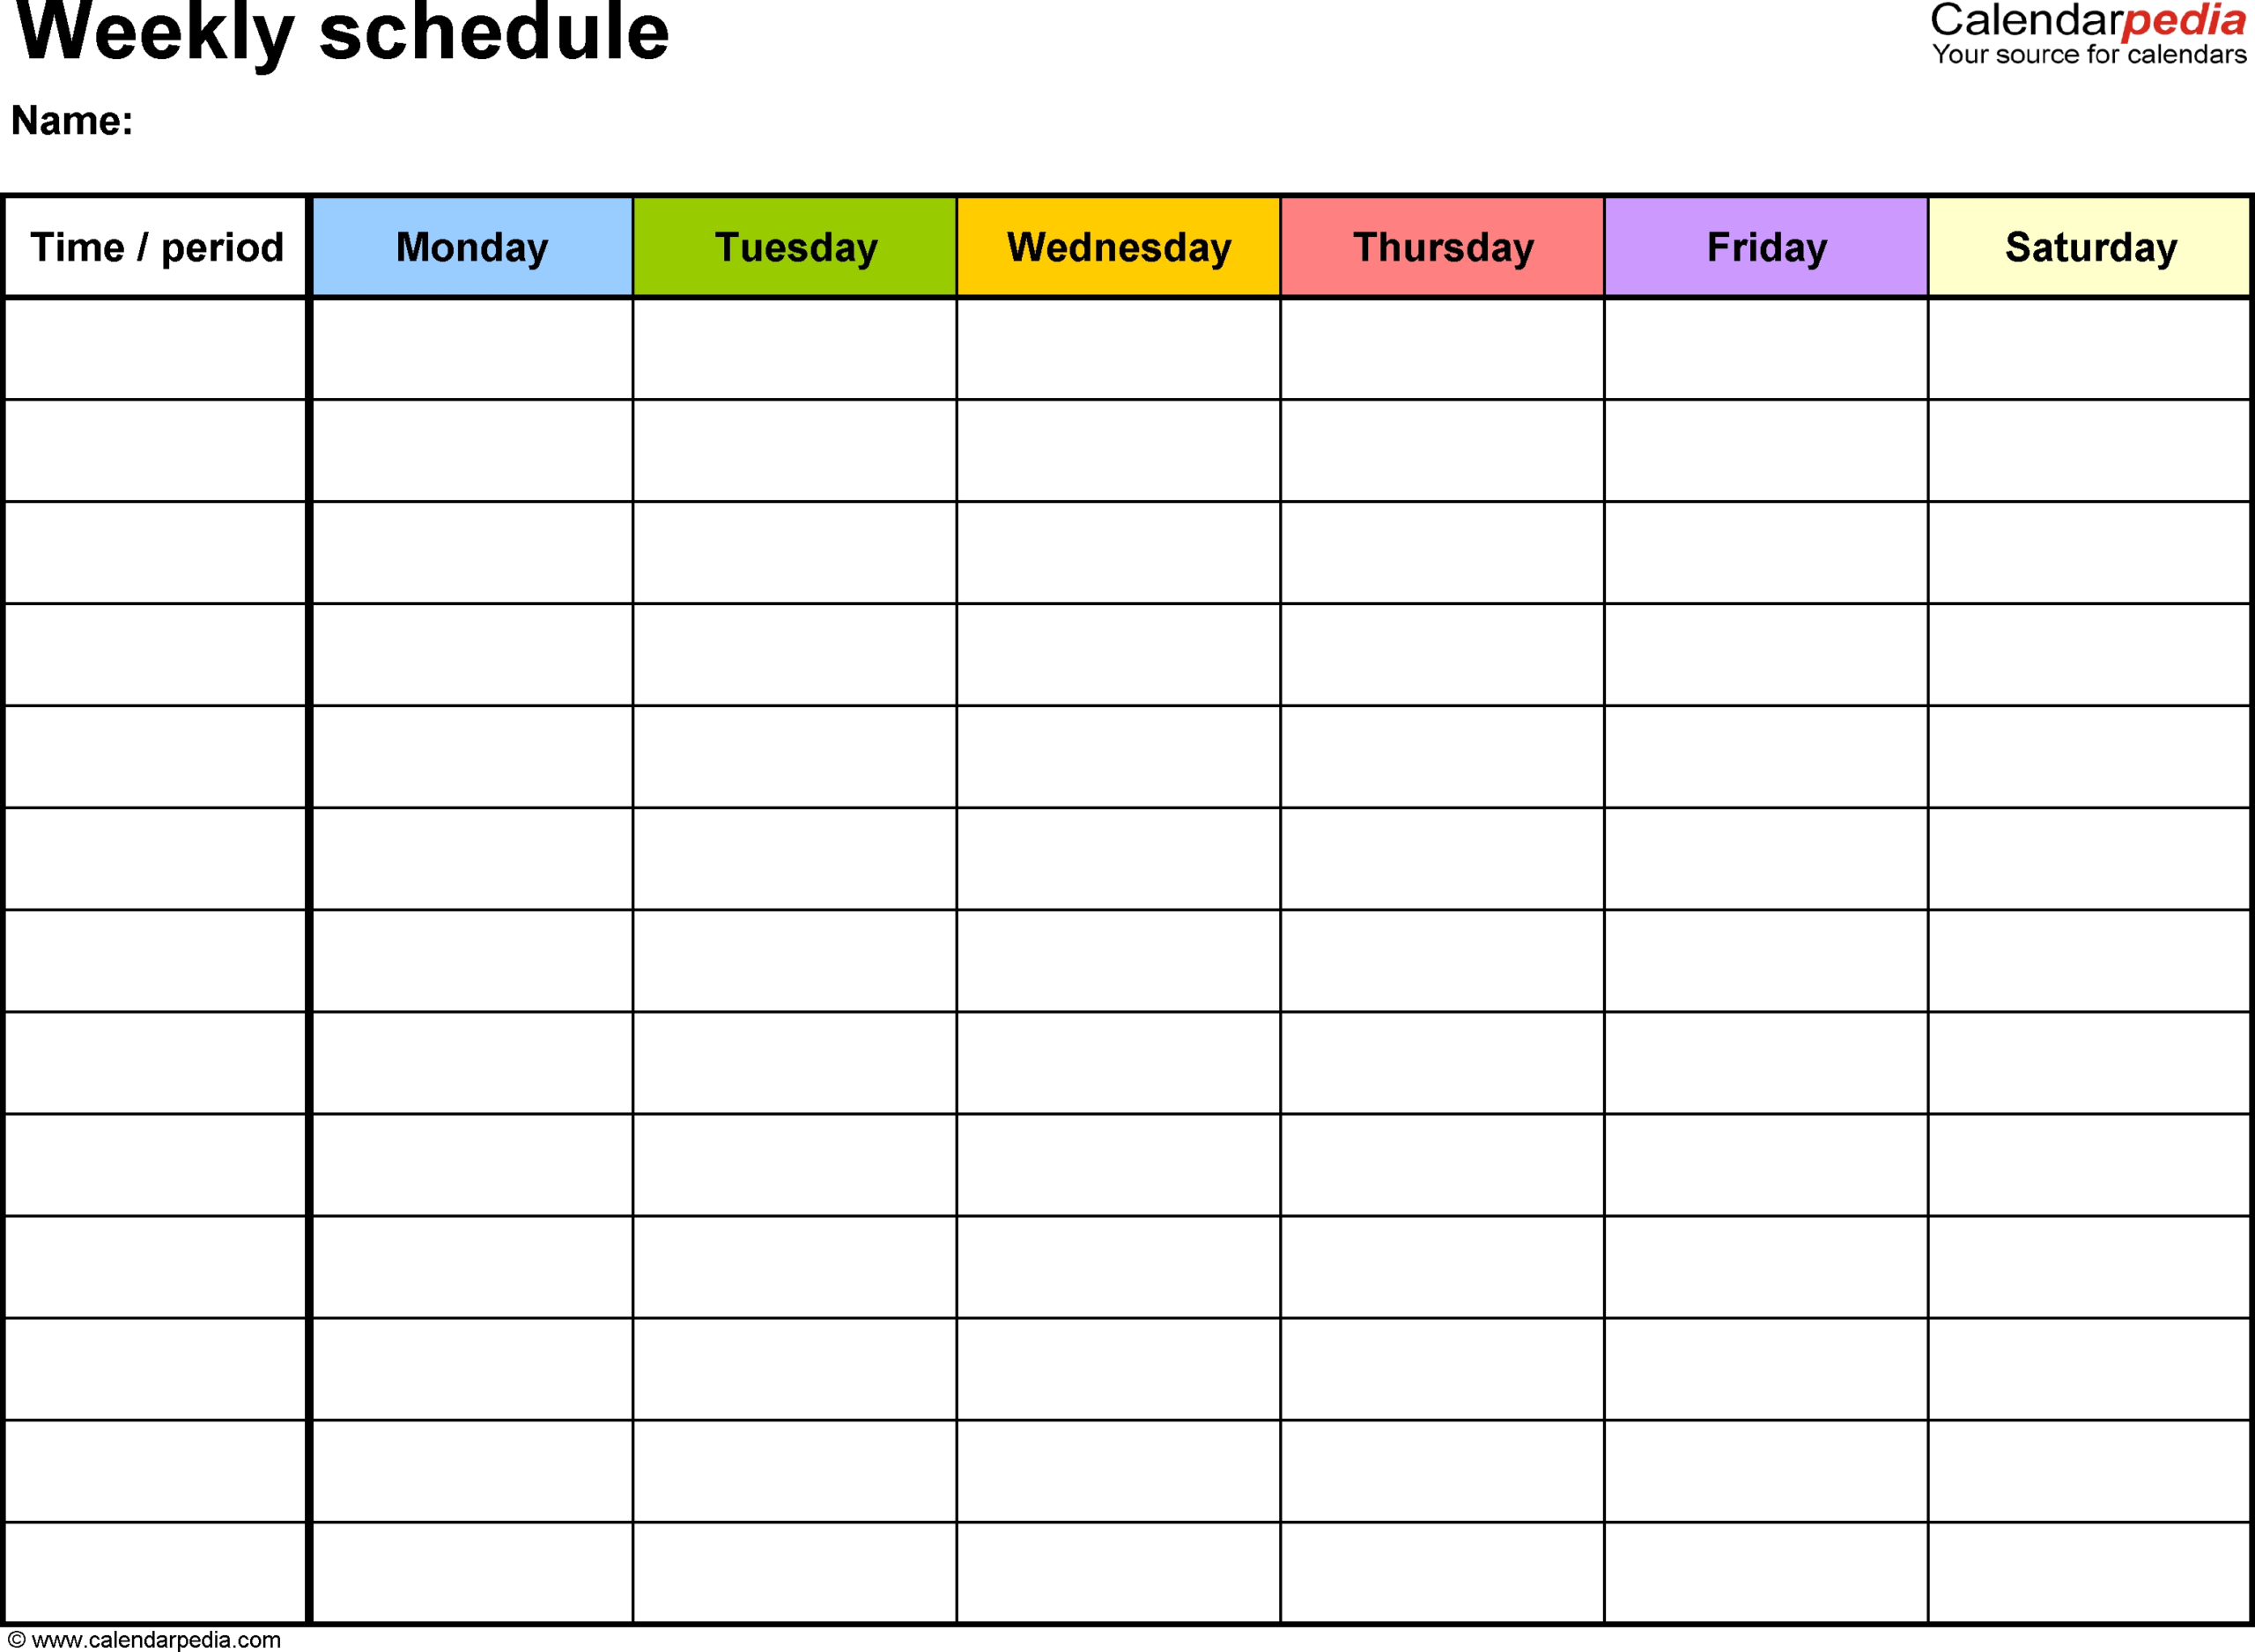 Free Printable Daily Calendar With Time Slots - Template  Free Printable Calendars With Times